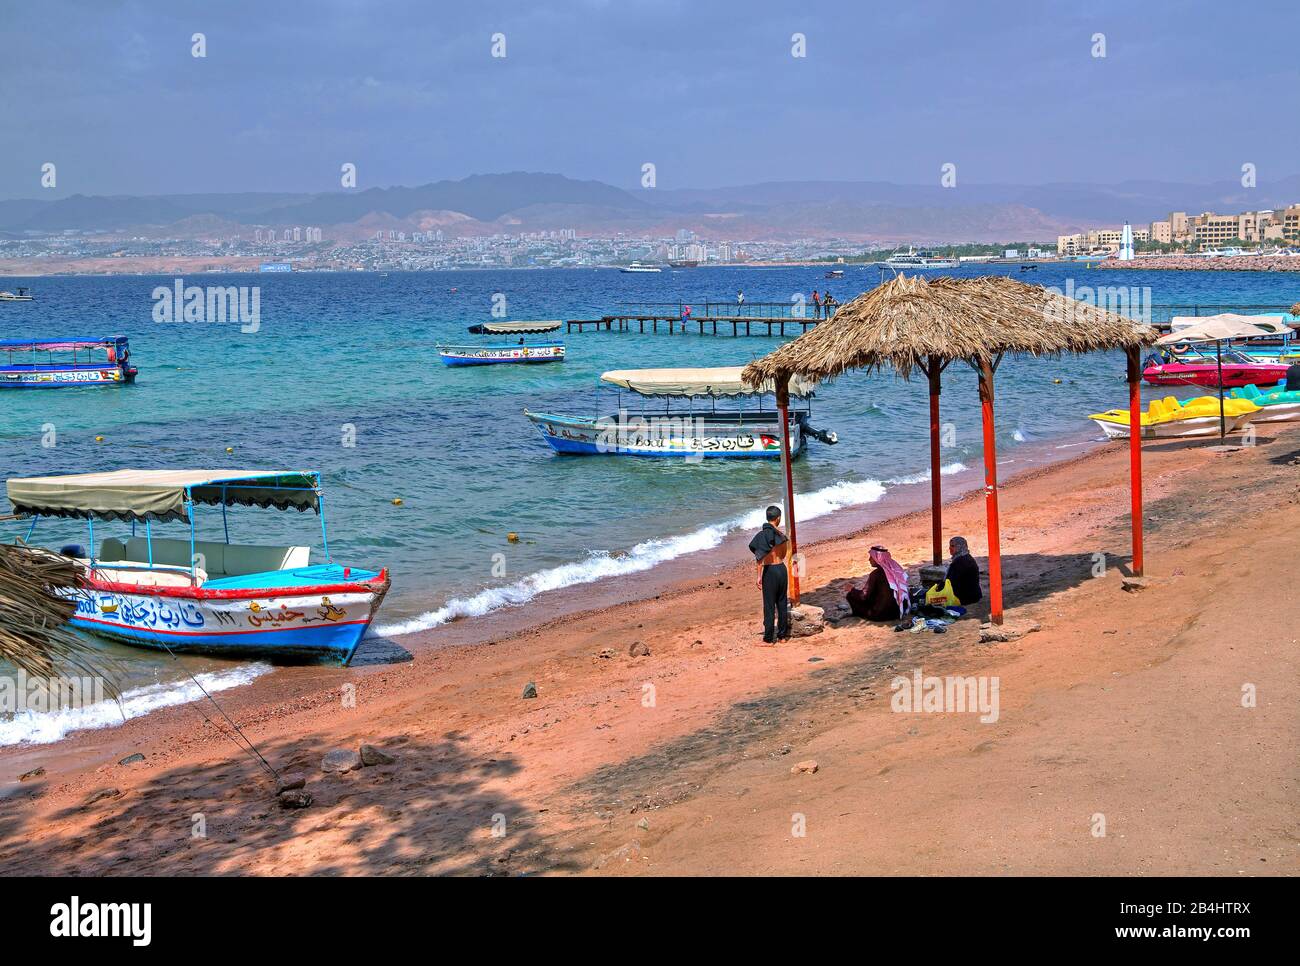 Locals at the city beach with excursion boats and view on Eilat Aqaba Aqaba, Gulf of Aqaba, Red Sea, Jordan Stock Photo